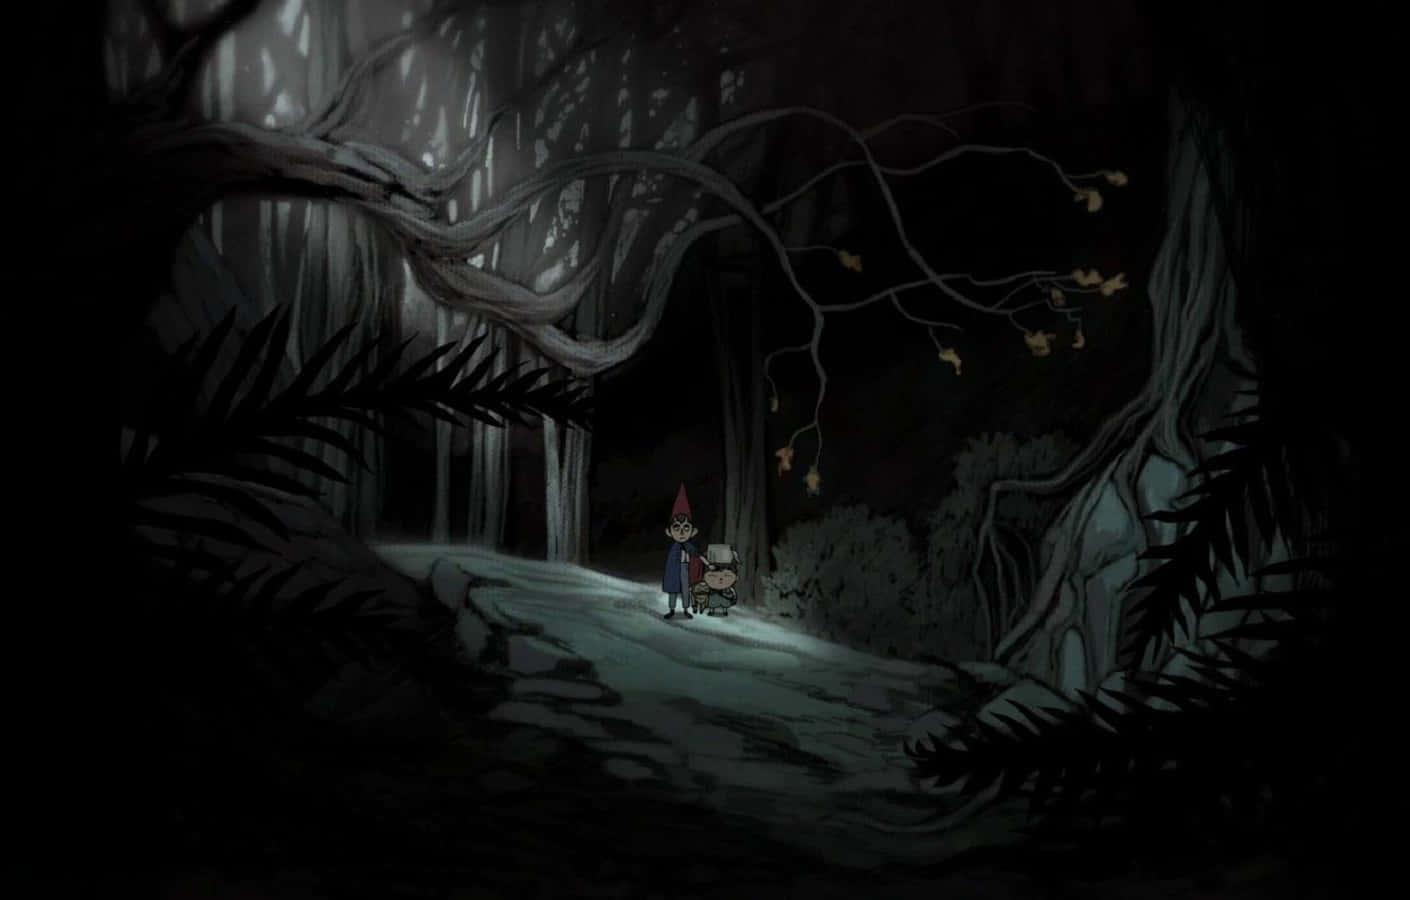 Journey with Odd, Wirt, and Greg in the Unknown World